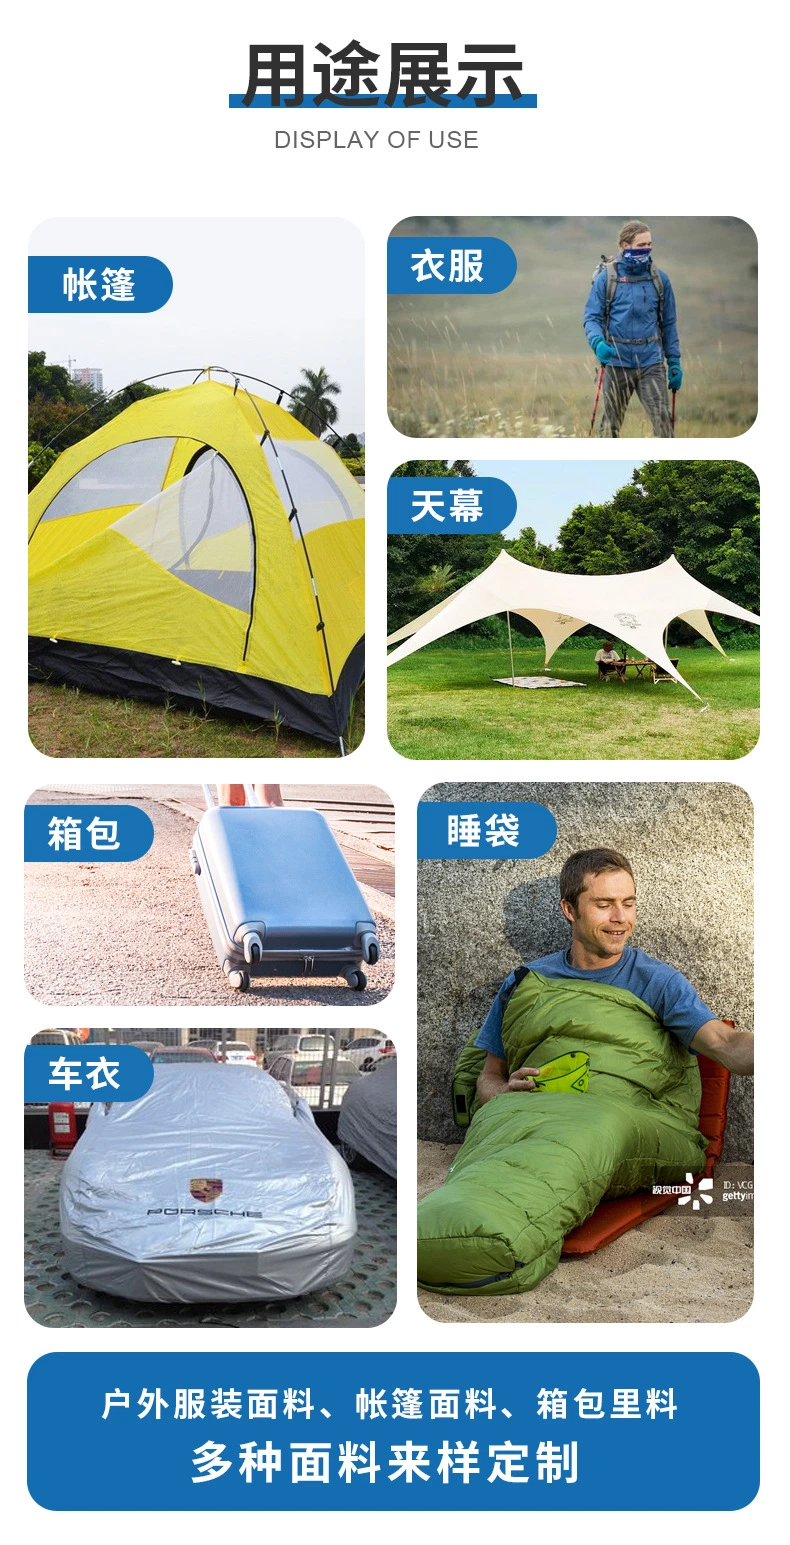 Waterproof Polyester Oxford Fabric Dyed Printing PU Coating Outdoor Tent Canopy Fabric